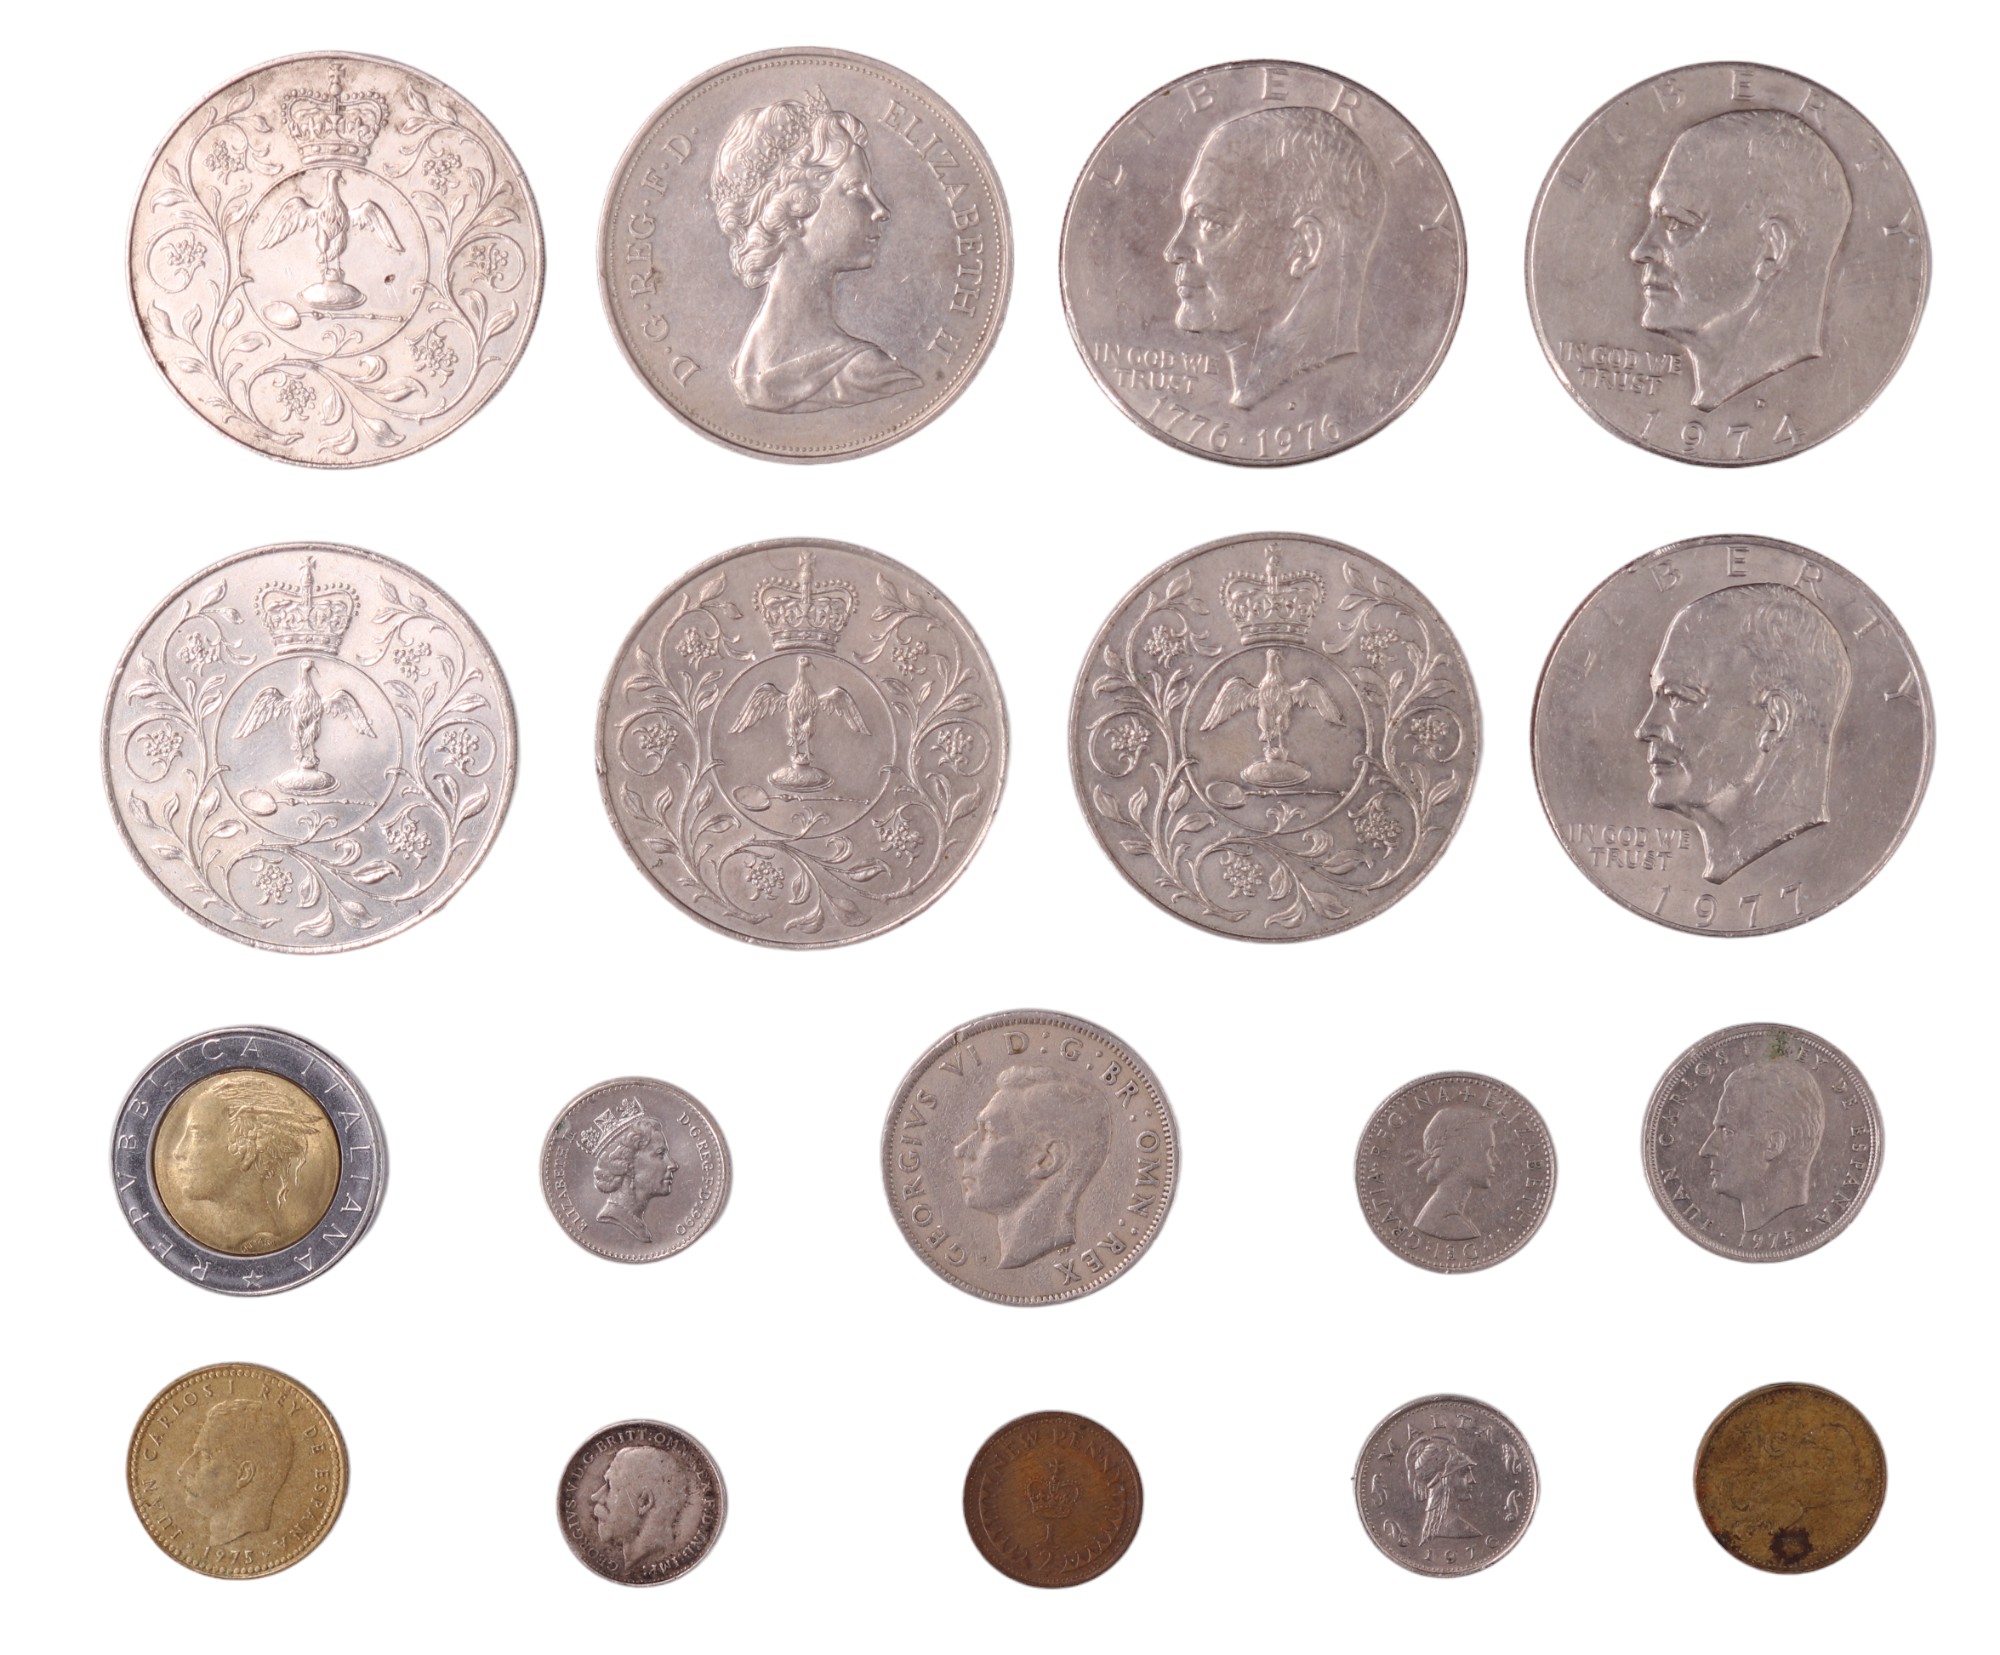 Two 1970s US Eisenhower dollars together with a group of GB royal commemorative coins, etc - Image 2 of 2